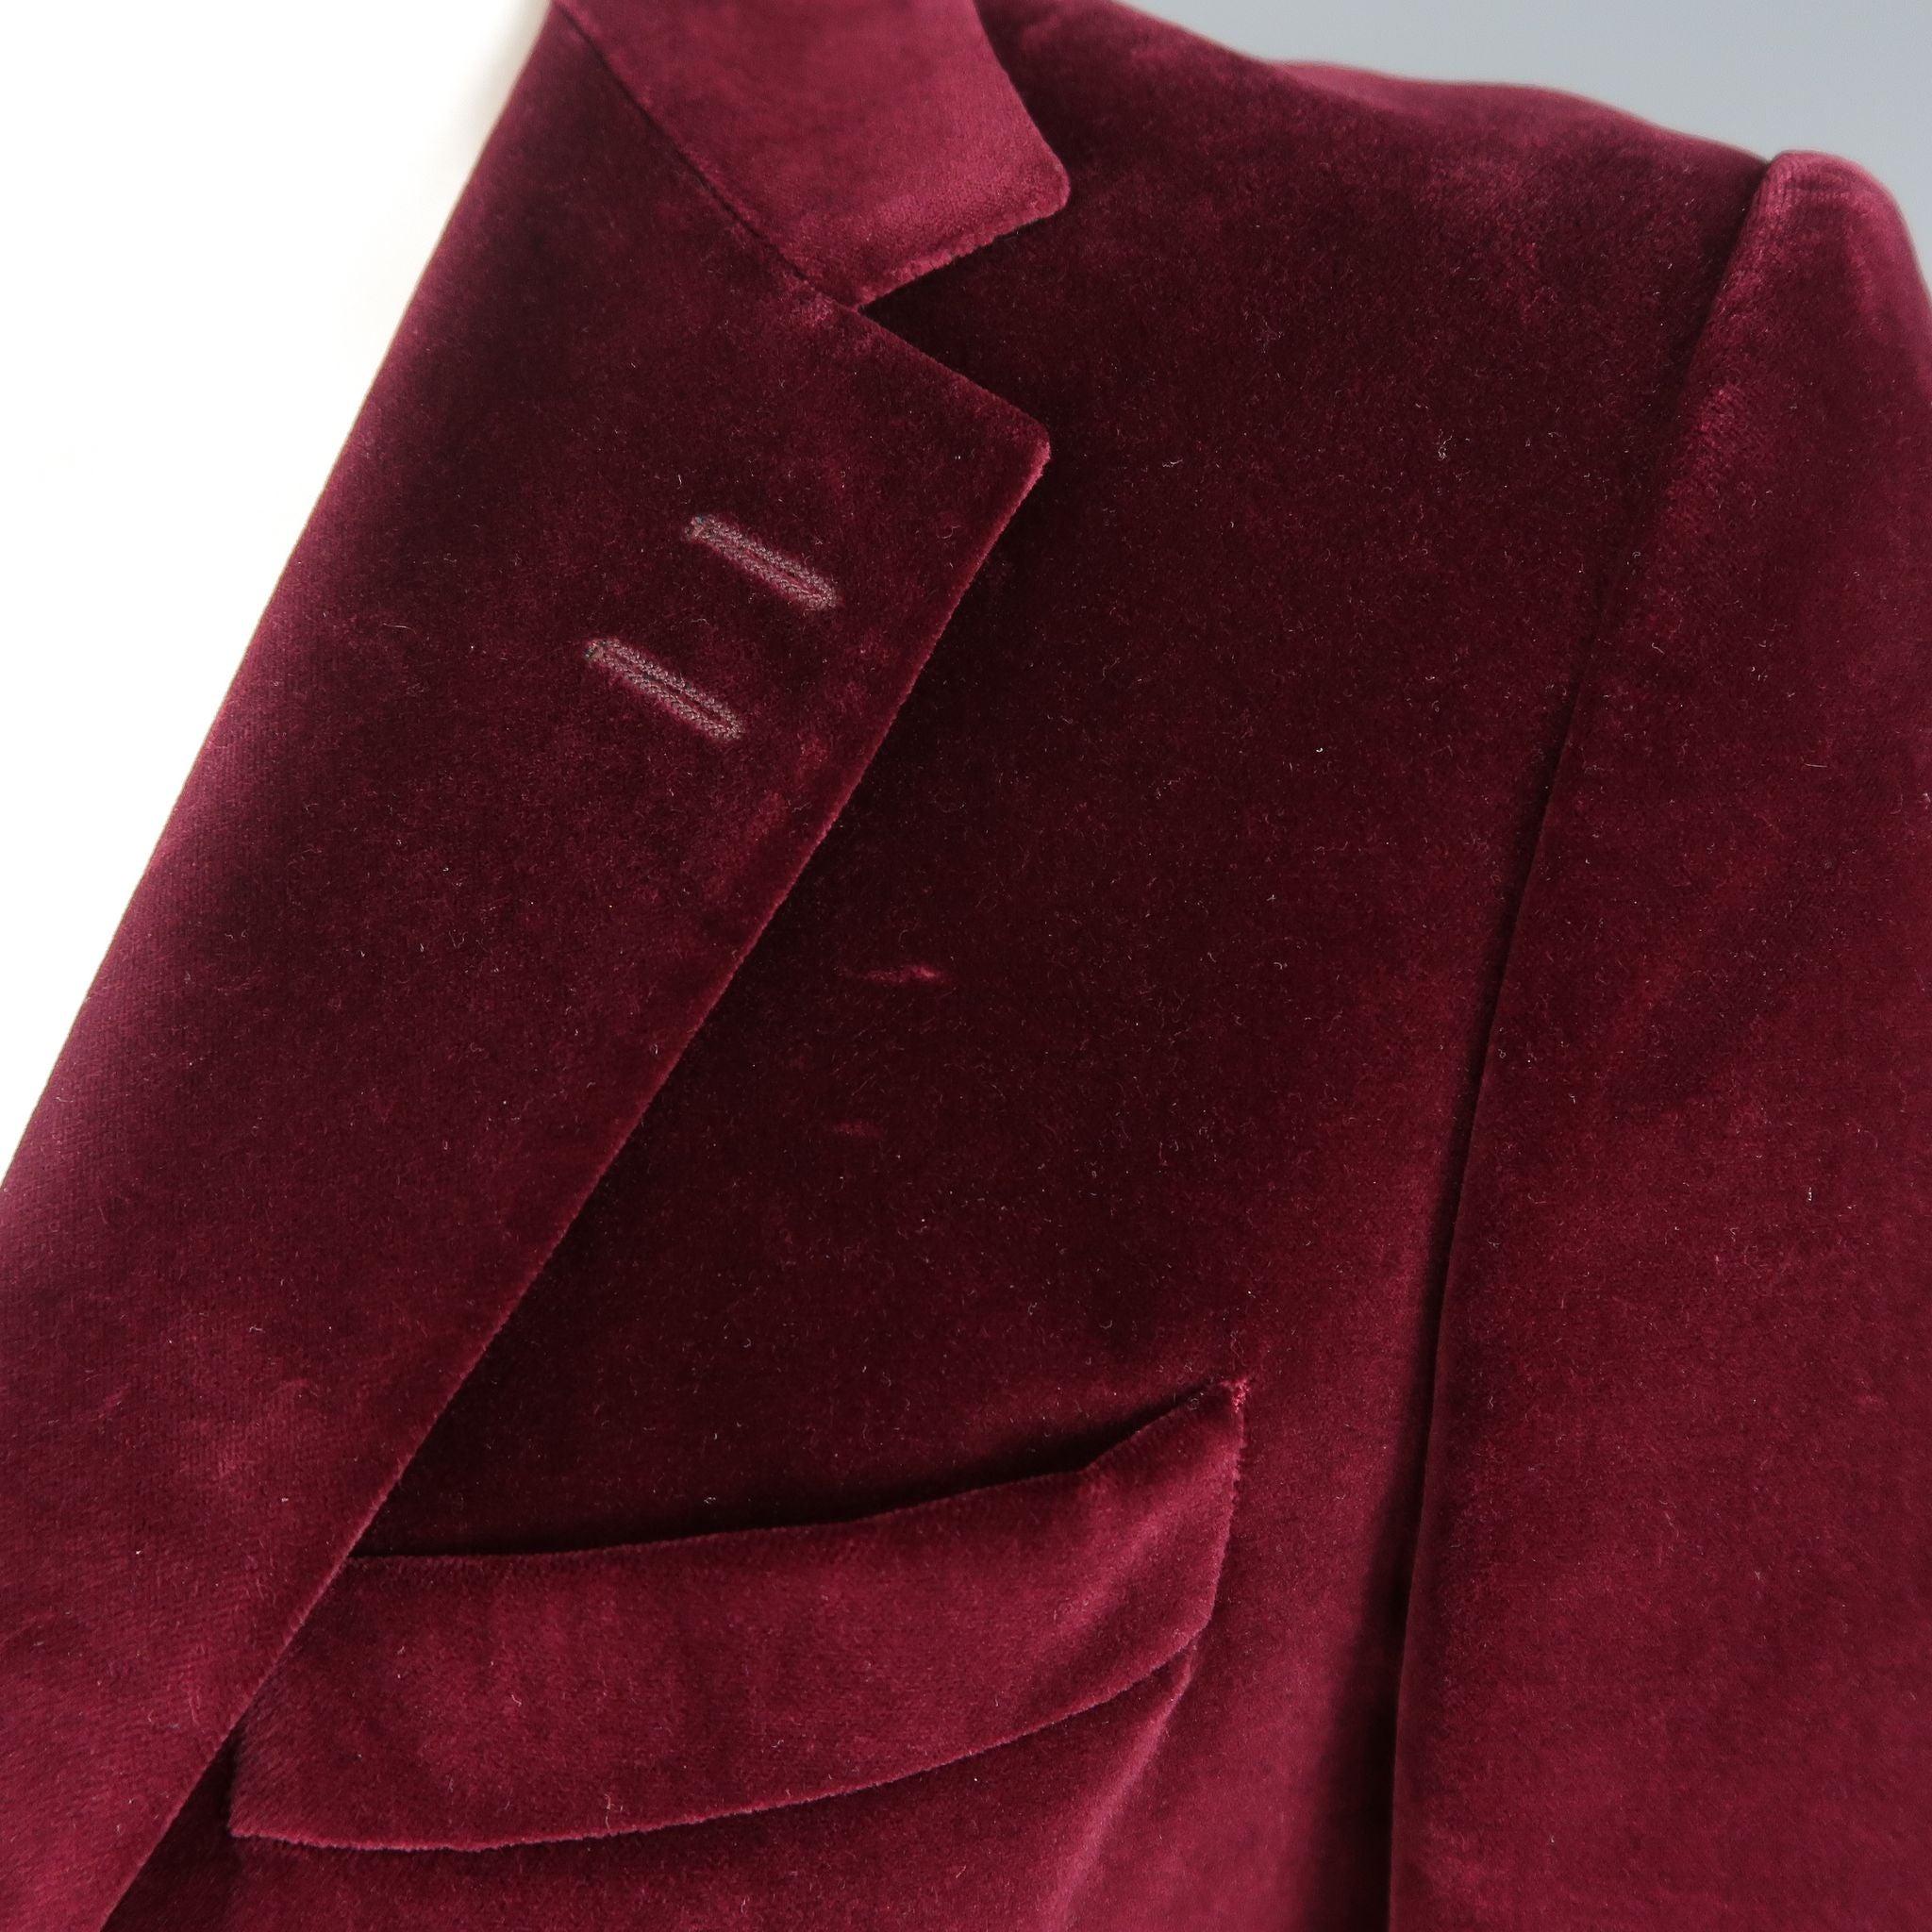 Single breasted PAUL SMITH sport coat jacket come sin burgundy velvet with a notch lapel, three button front, and flap pockets. Minor wear throughout fabric. As-is. Made in Italy.Good Pre-Owned Condition. 

Marked:   IT 50 L 

Measurements: 
